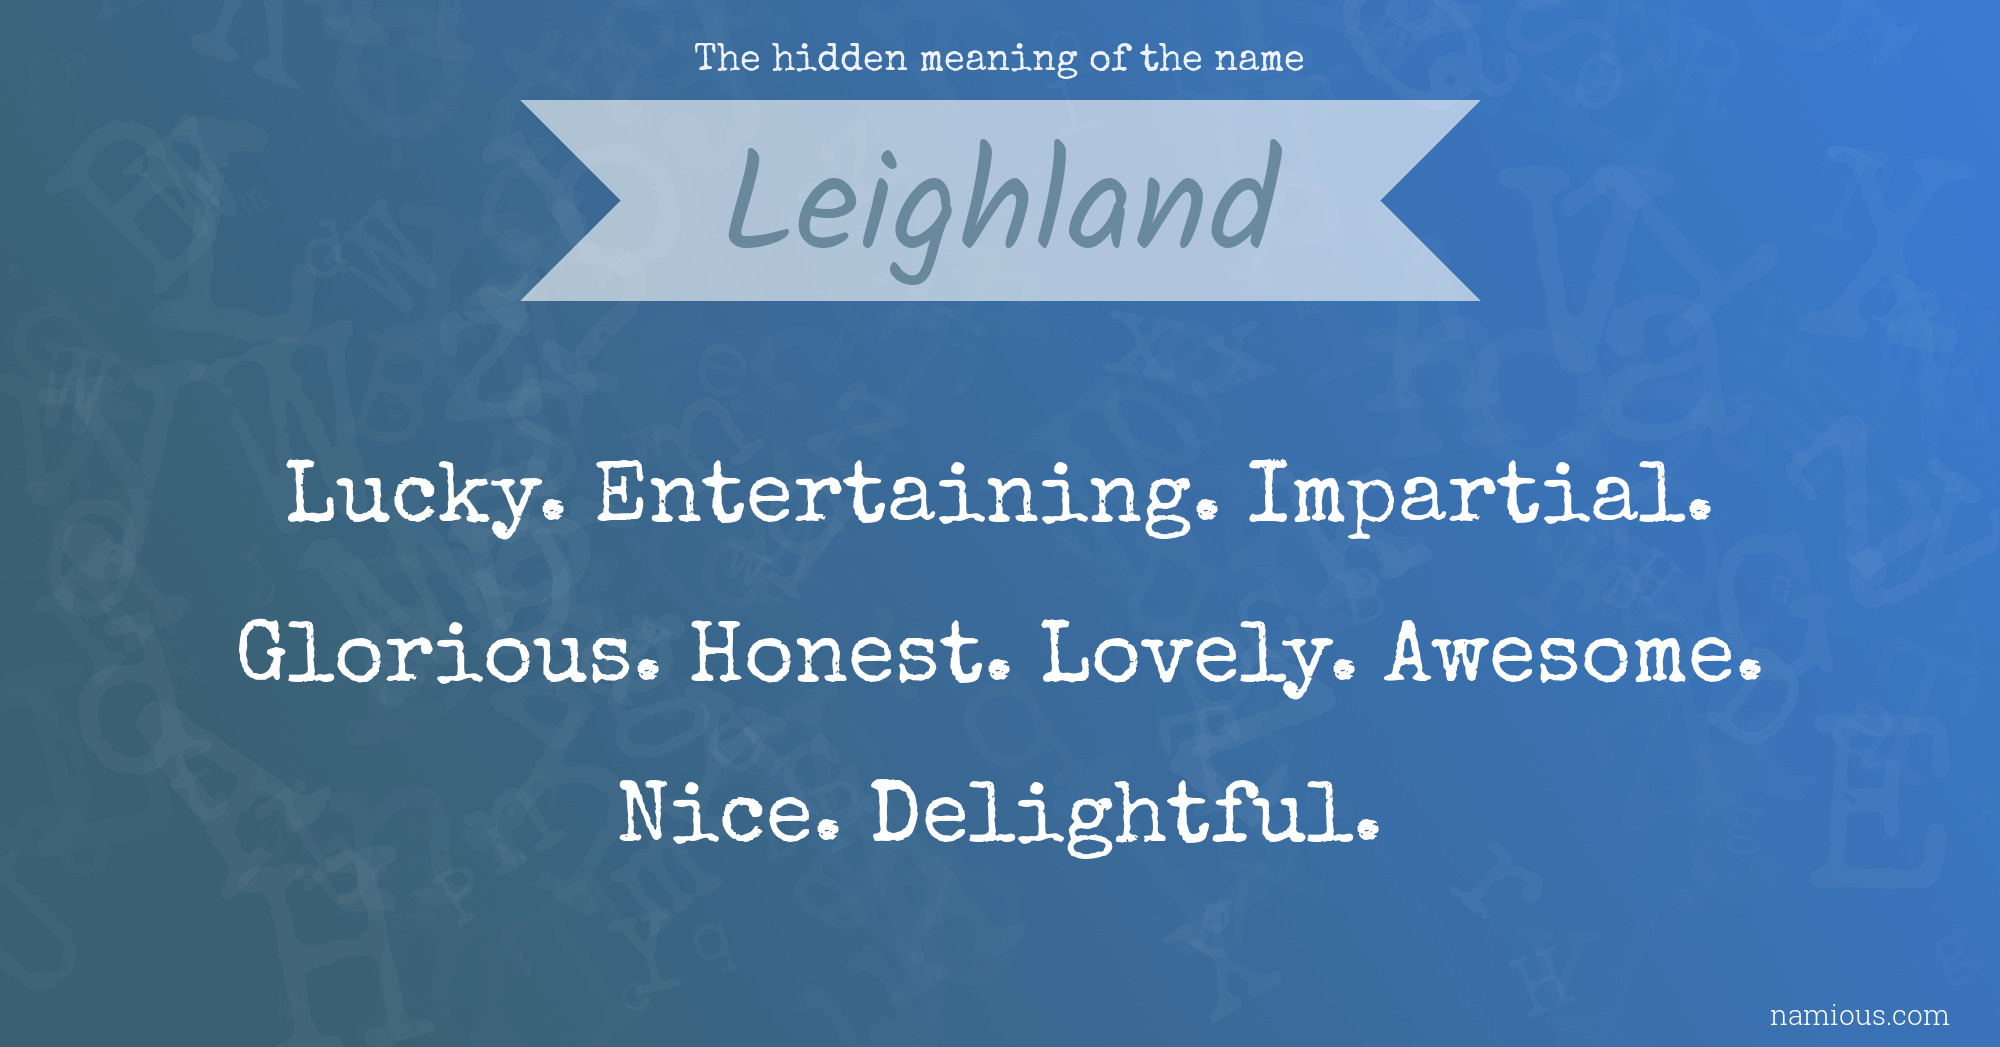 The hidden meaning of the name Leighland